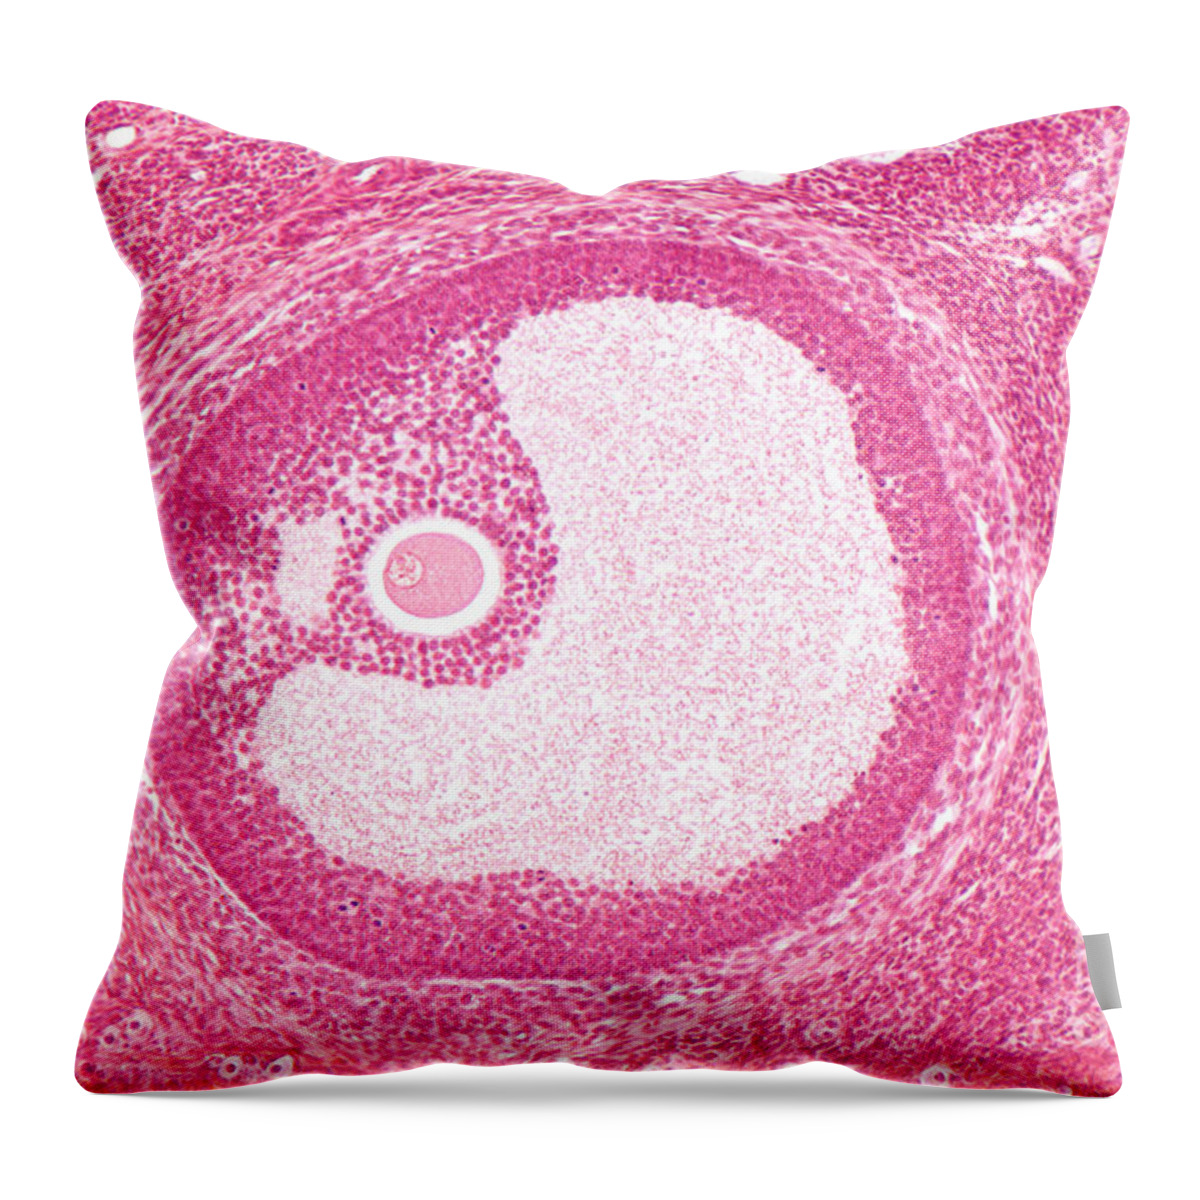 Histology Throw Pillow featuring the photograph Mature Graafian Follicle, Mouse Ovary by M. I. Walker